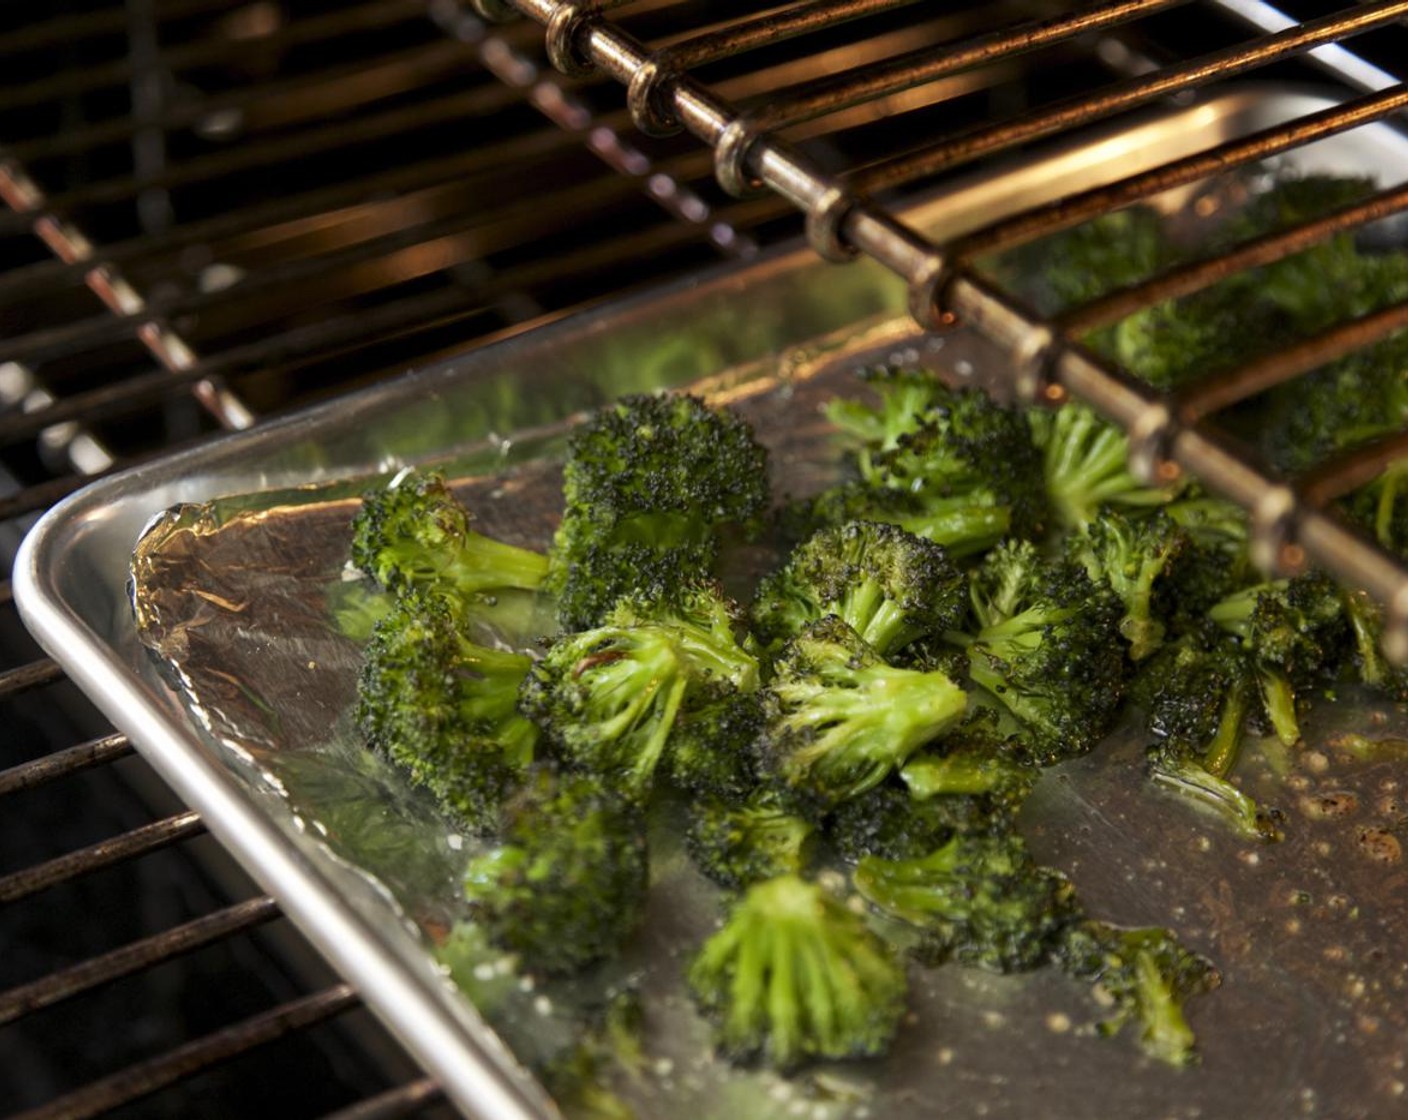 step 12 Place the Broccoli Florets (1 cup) on the sheet pan. Drizzle with Olive Oil (1 Tbsp) and minced garlic, sprinkle Salt (1/4 tsp) over the broccoli and toss. Spread into a single layer and roast in the oven for 15 minutes.